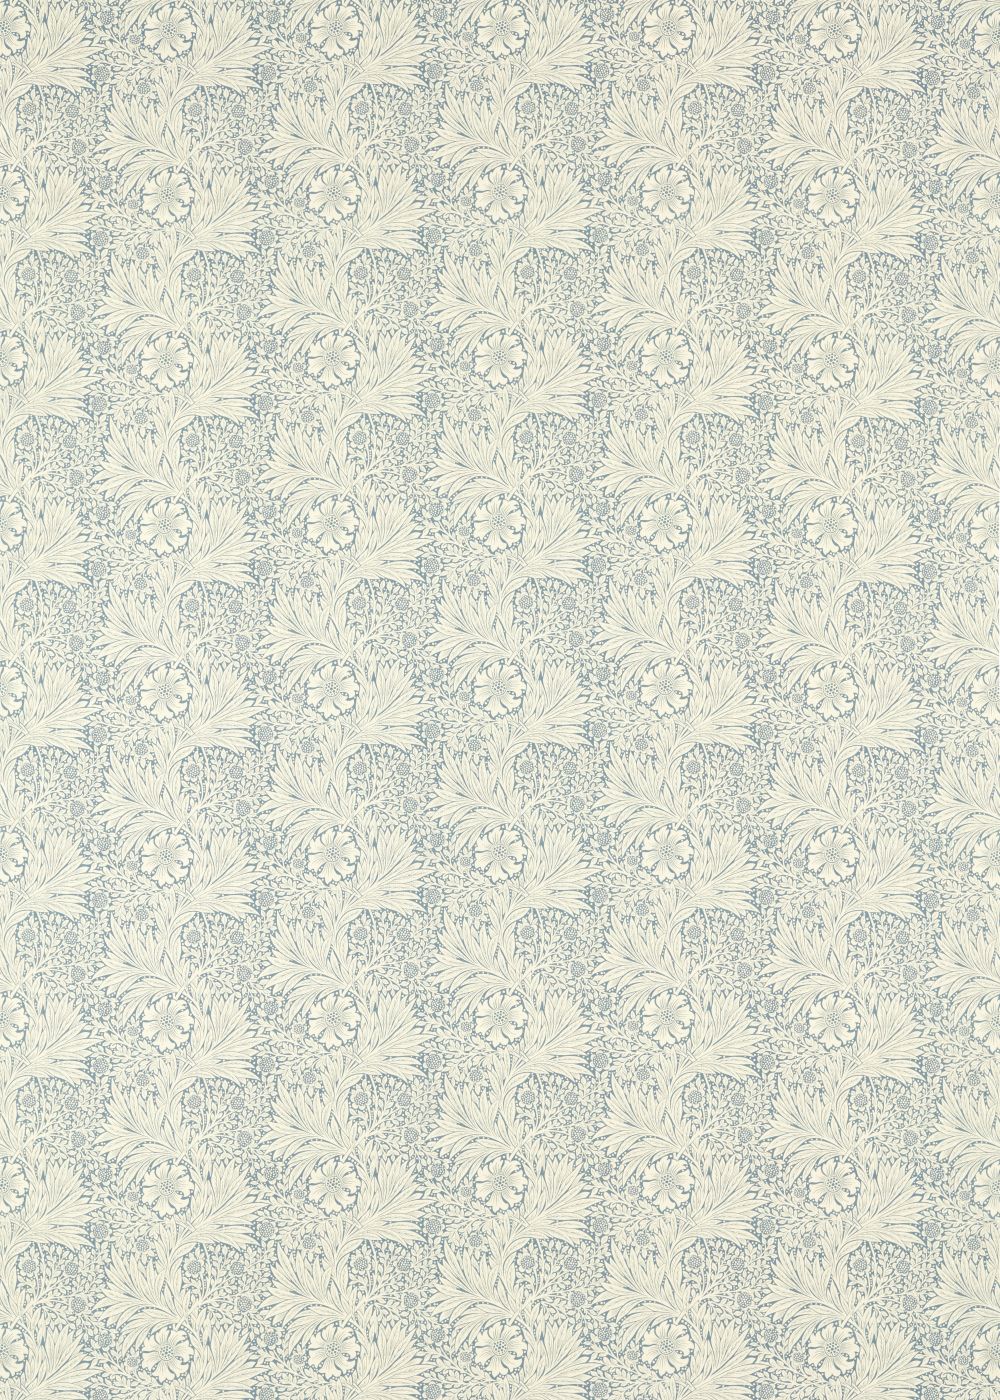 Marigold Fabric - Mineral Blue - by Morris